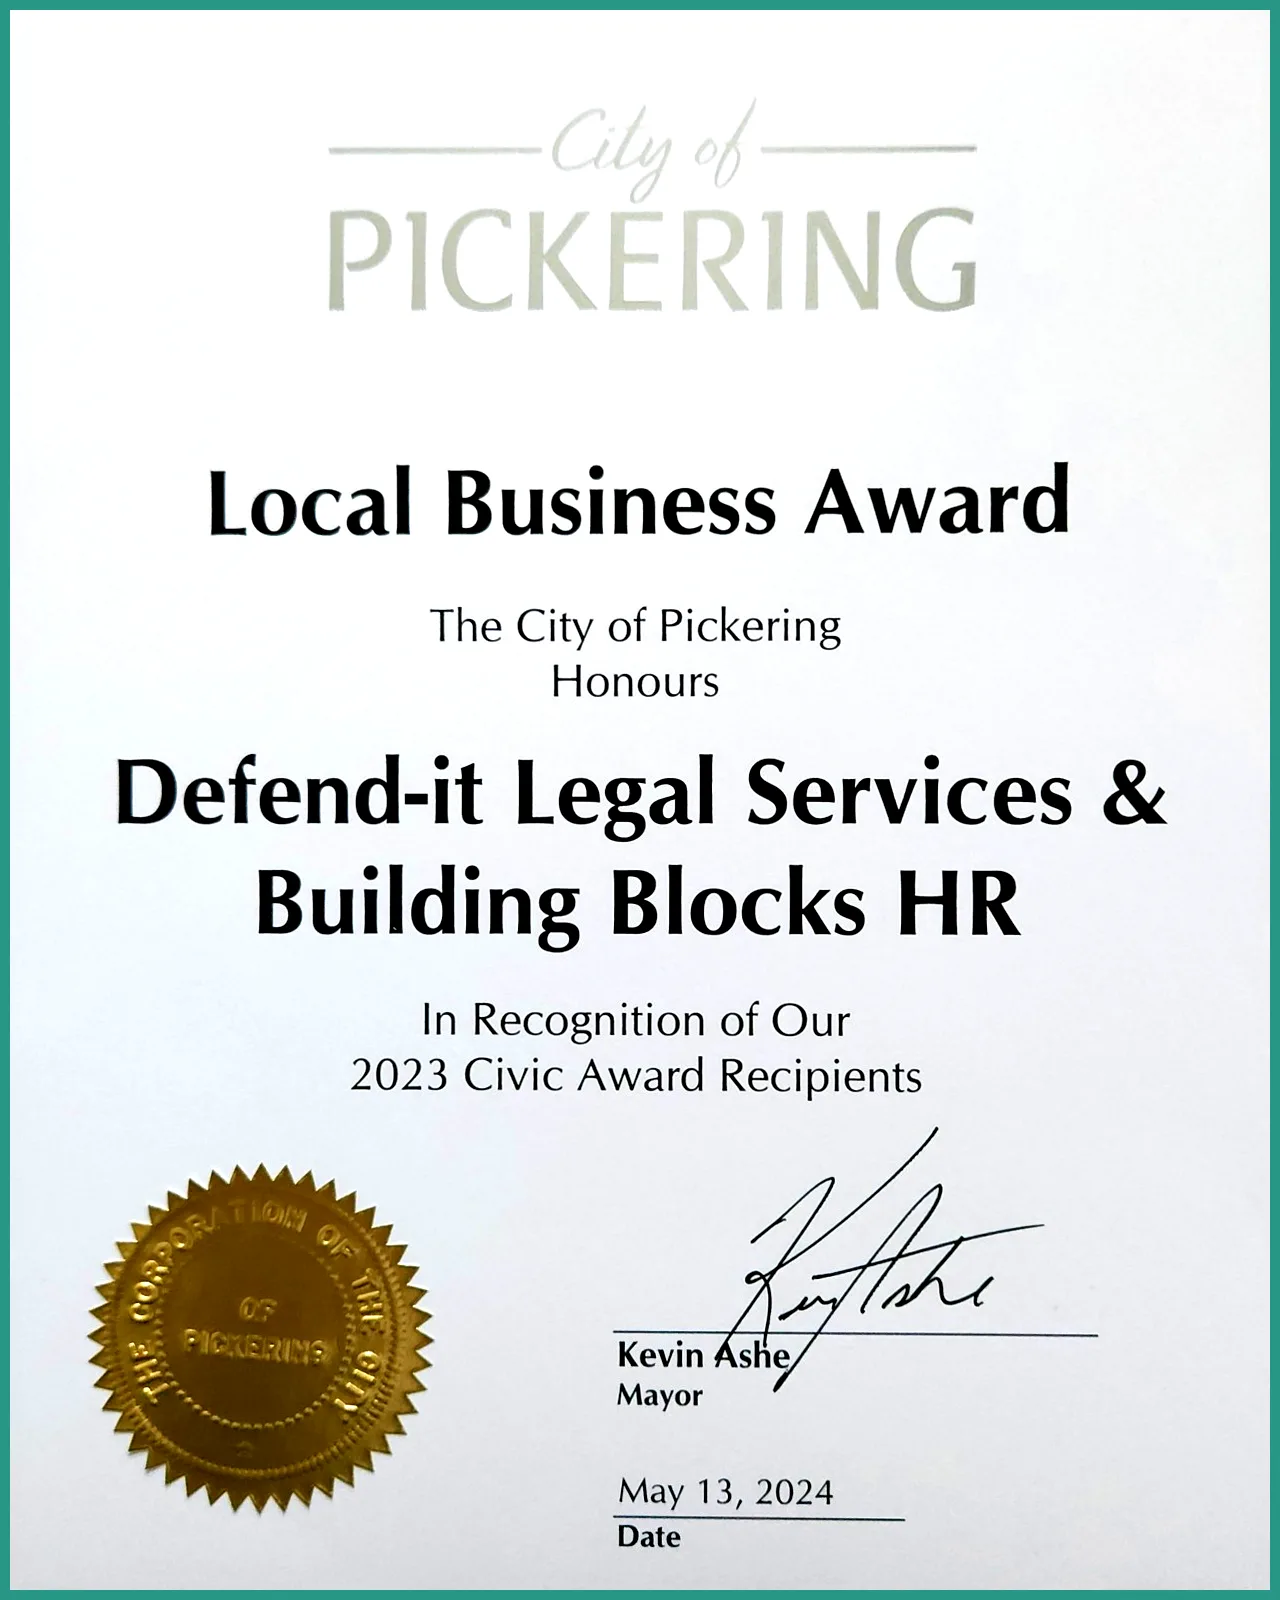 City of Pickering Civic Award 2023: Recipient of Award in Recognition of Local Contributions